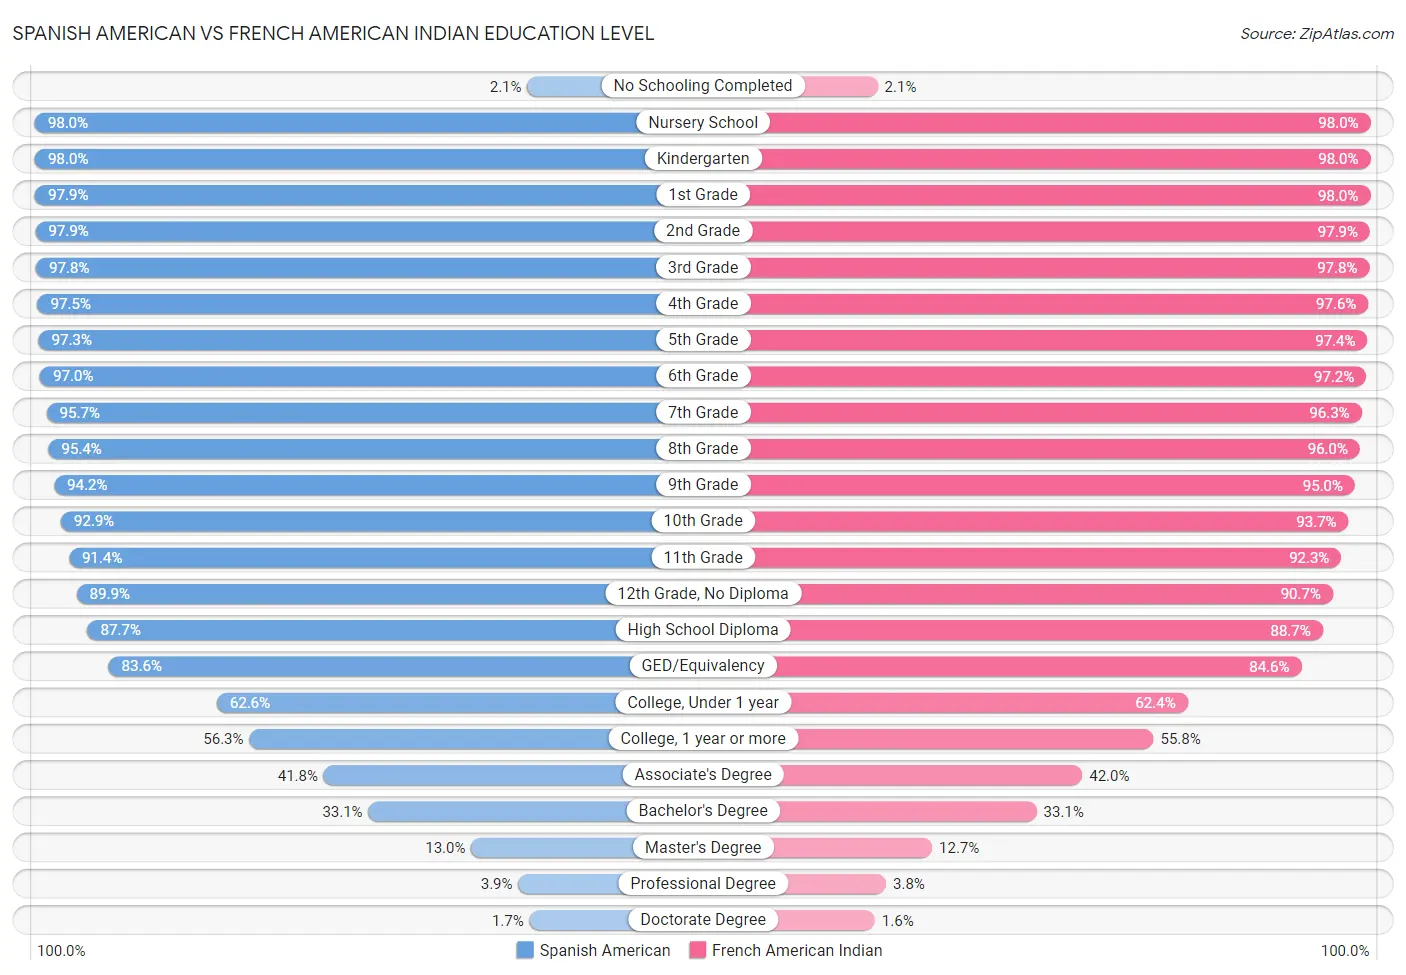 Spanish American vs French American Indian Education Level